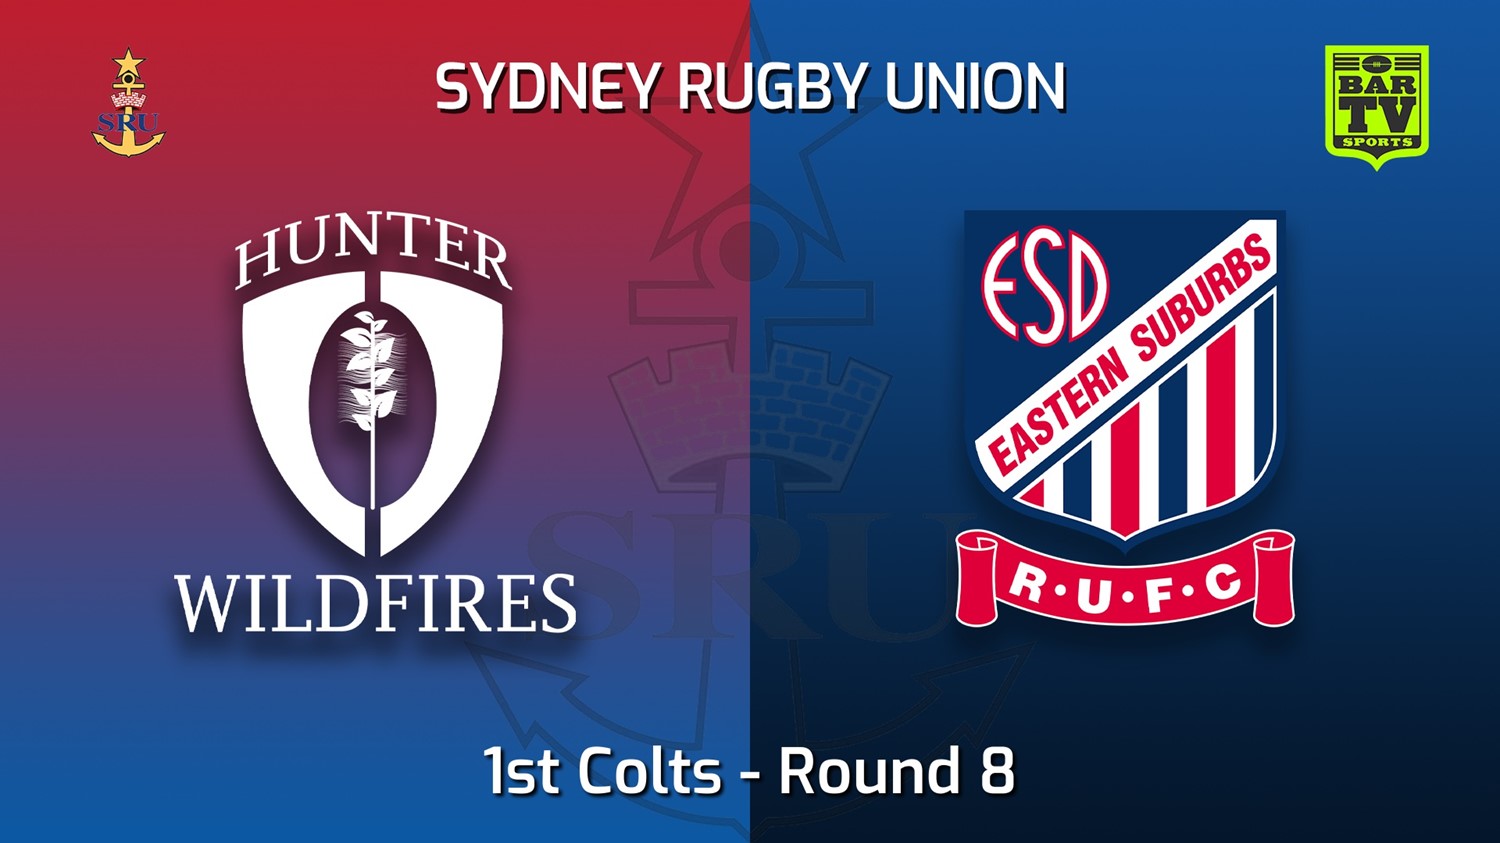 220521-Sydney Rugby Union Round 8 - 1st Colts - Hunter Wildfires v Eastern Suburbs Sydney Slate Image